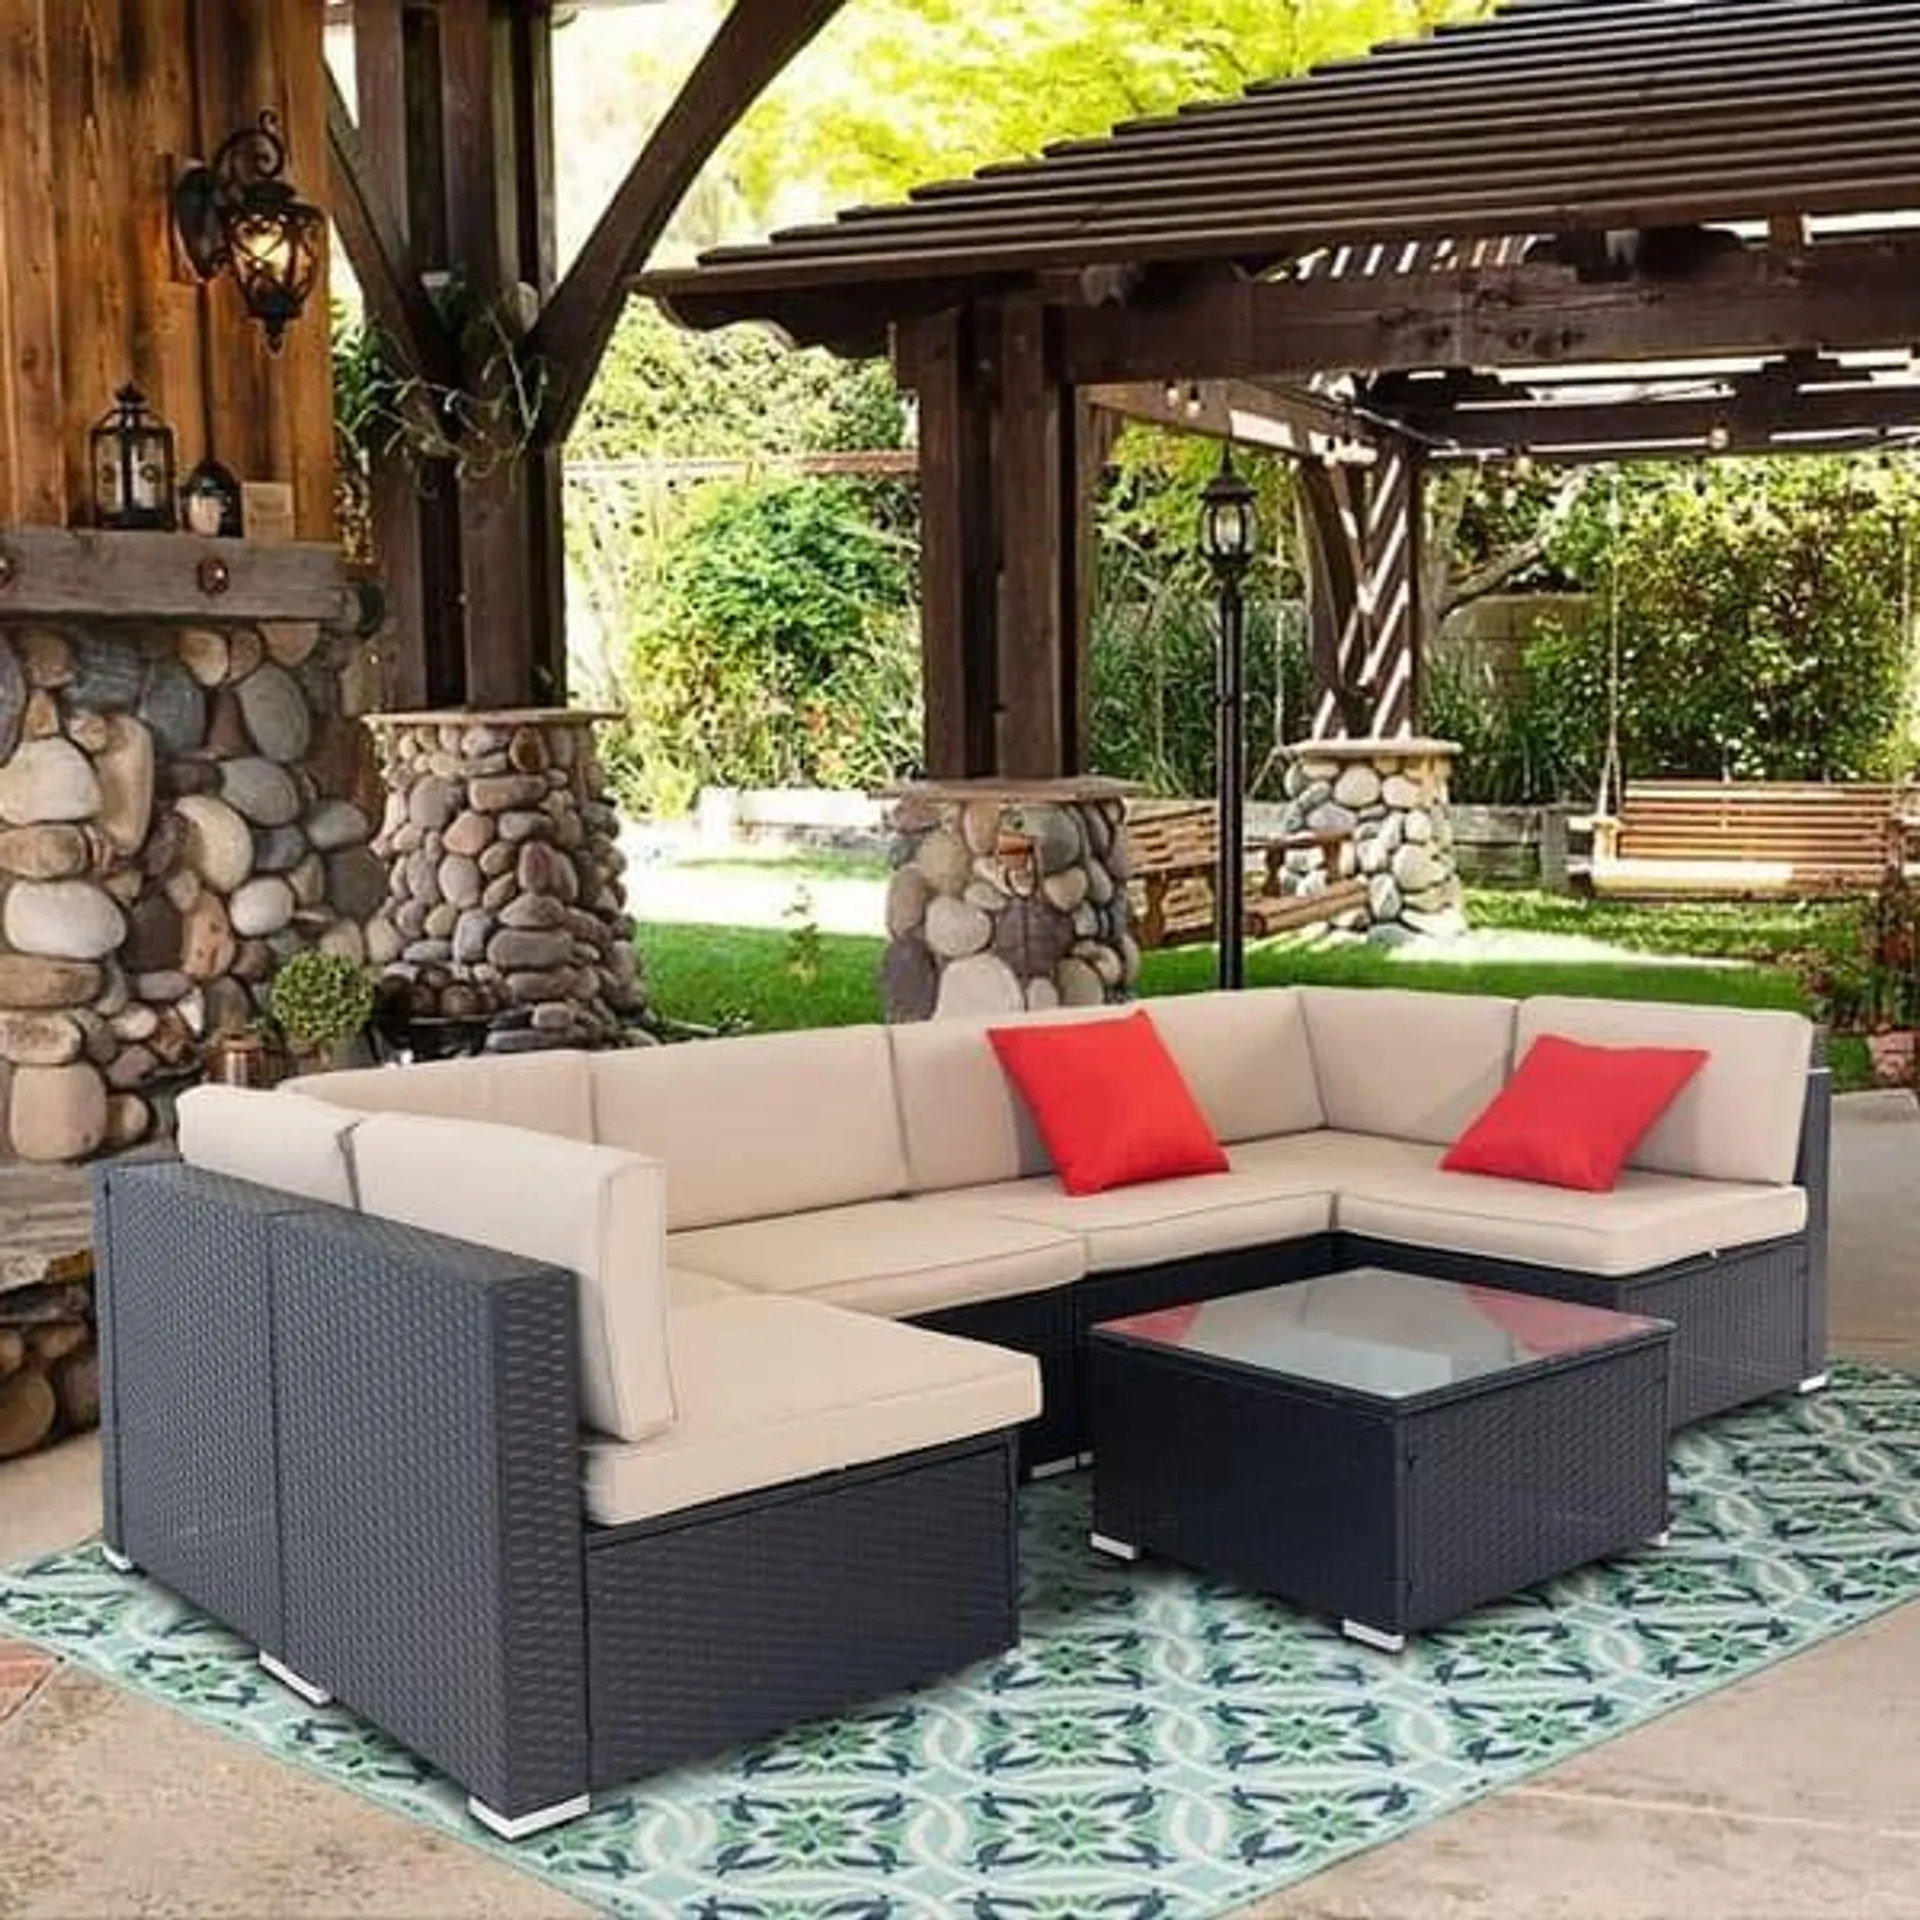 Outdoor 7-piece Patio Furniture Black Wicker Rattan Sectional Sofa Set by Havenside Home